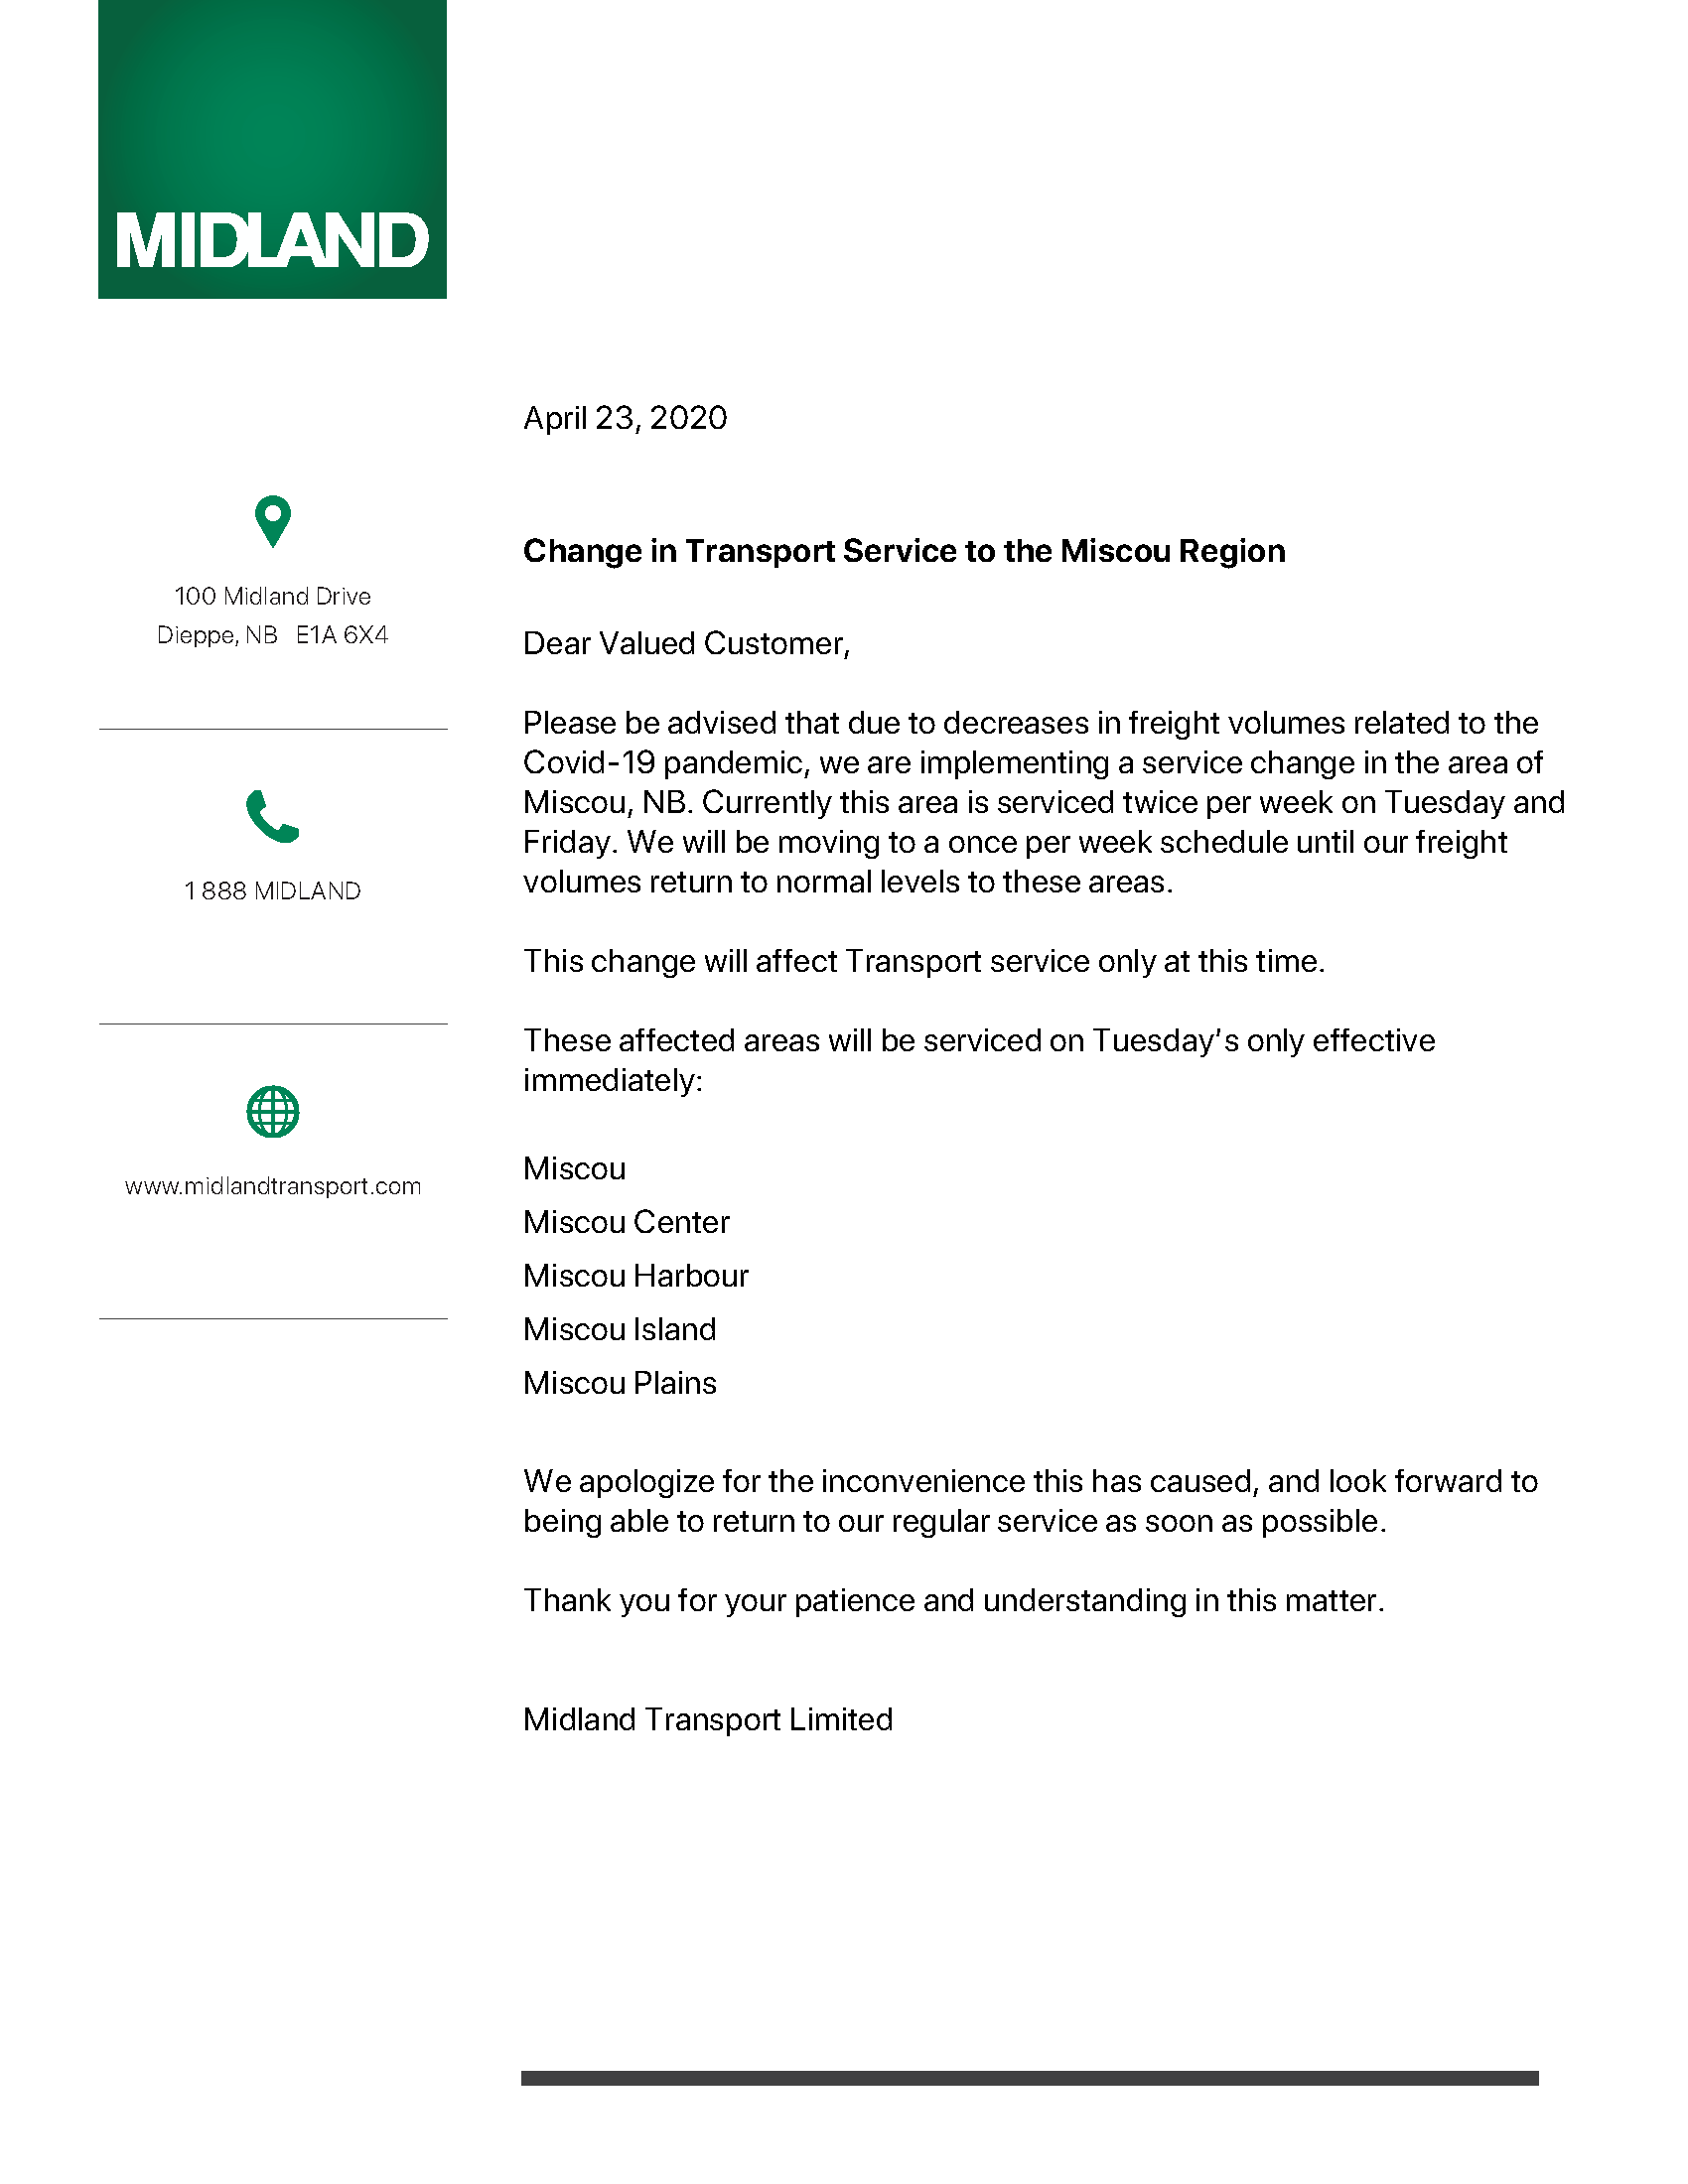 Change in Transport Service to the Miscou Region - April 23, 2020